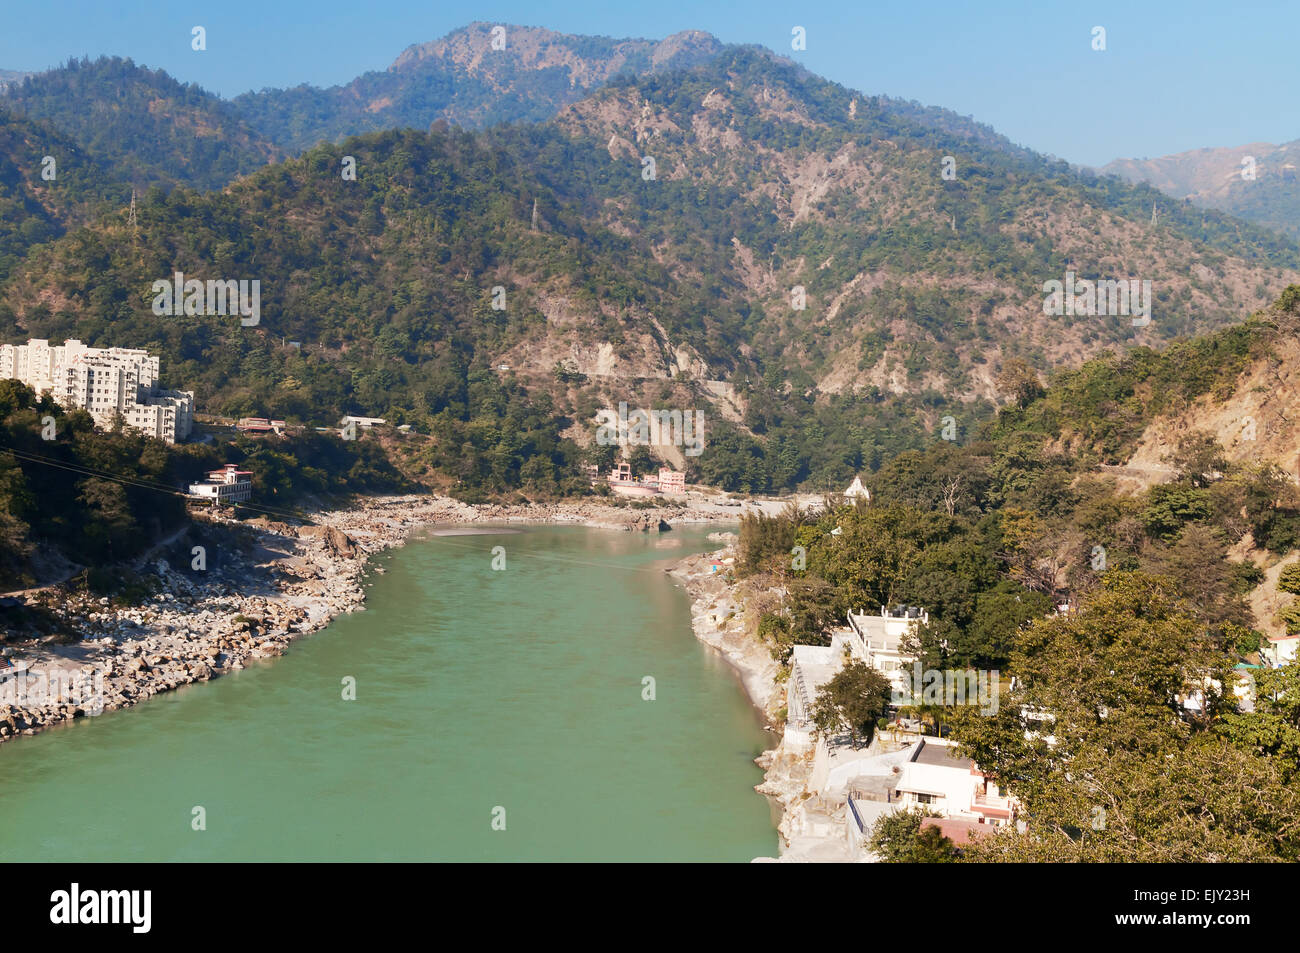 View of River Ganges in Laxman Jhula at the moning. Stock Photo